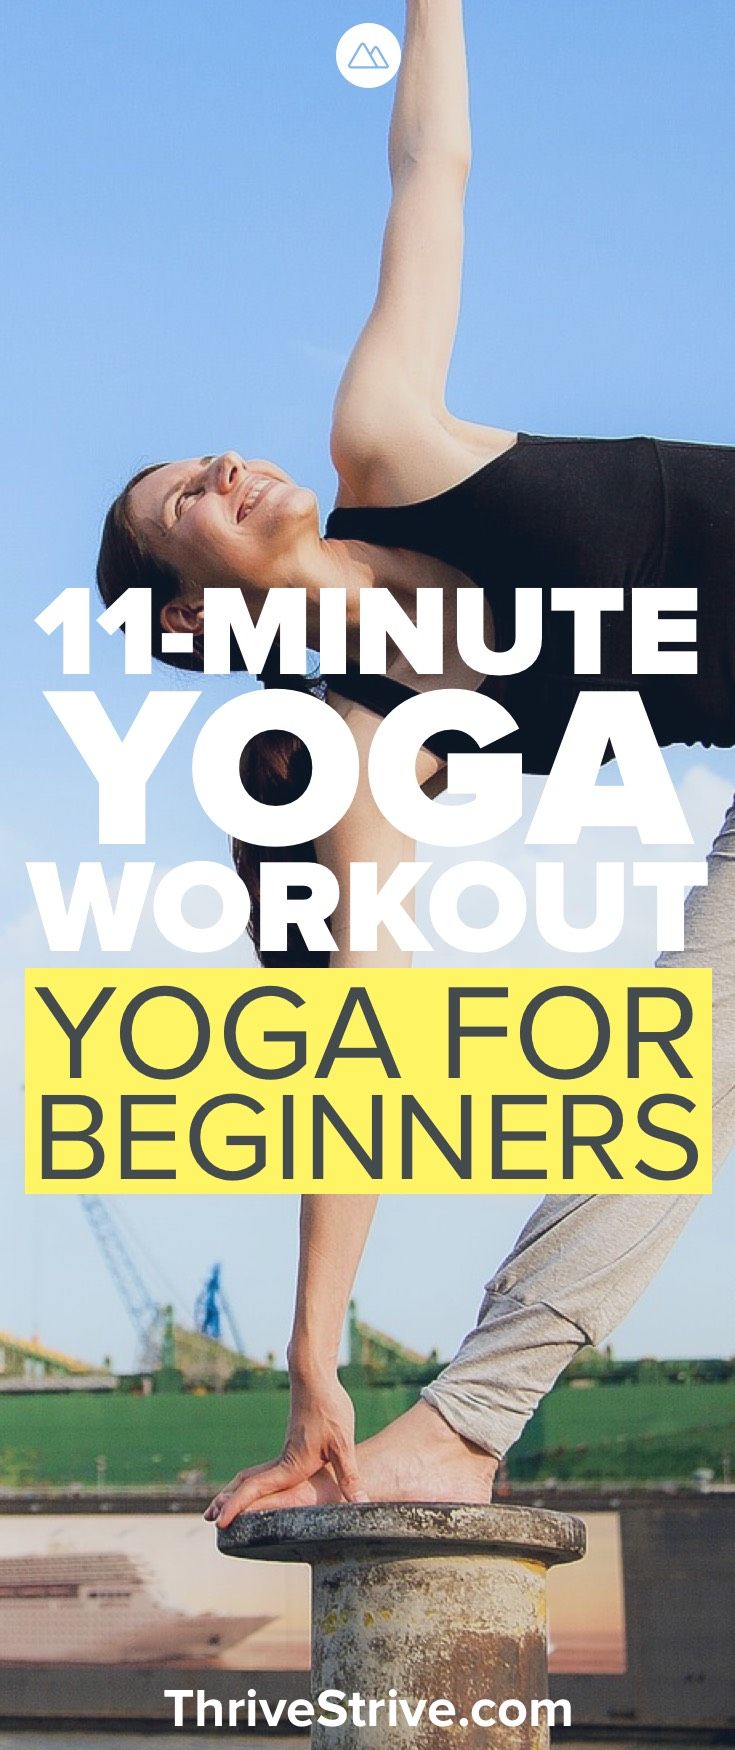 Ready to get started with yoga? This yoga for beginners workout is just the thin...